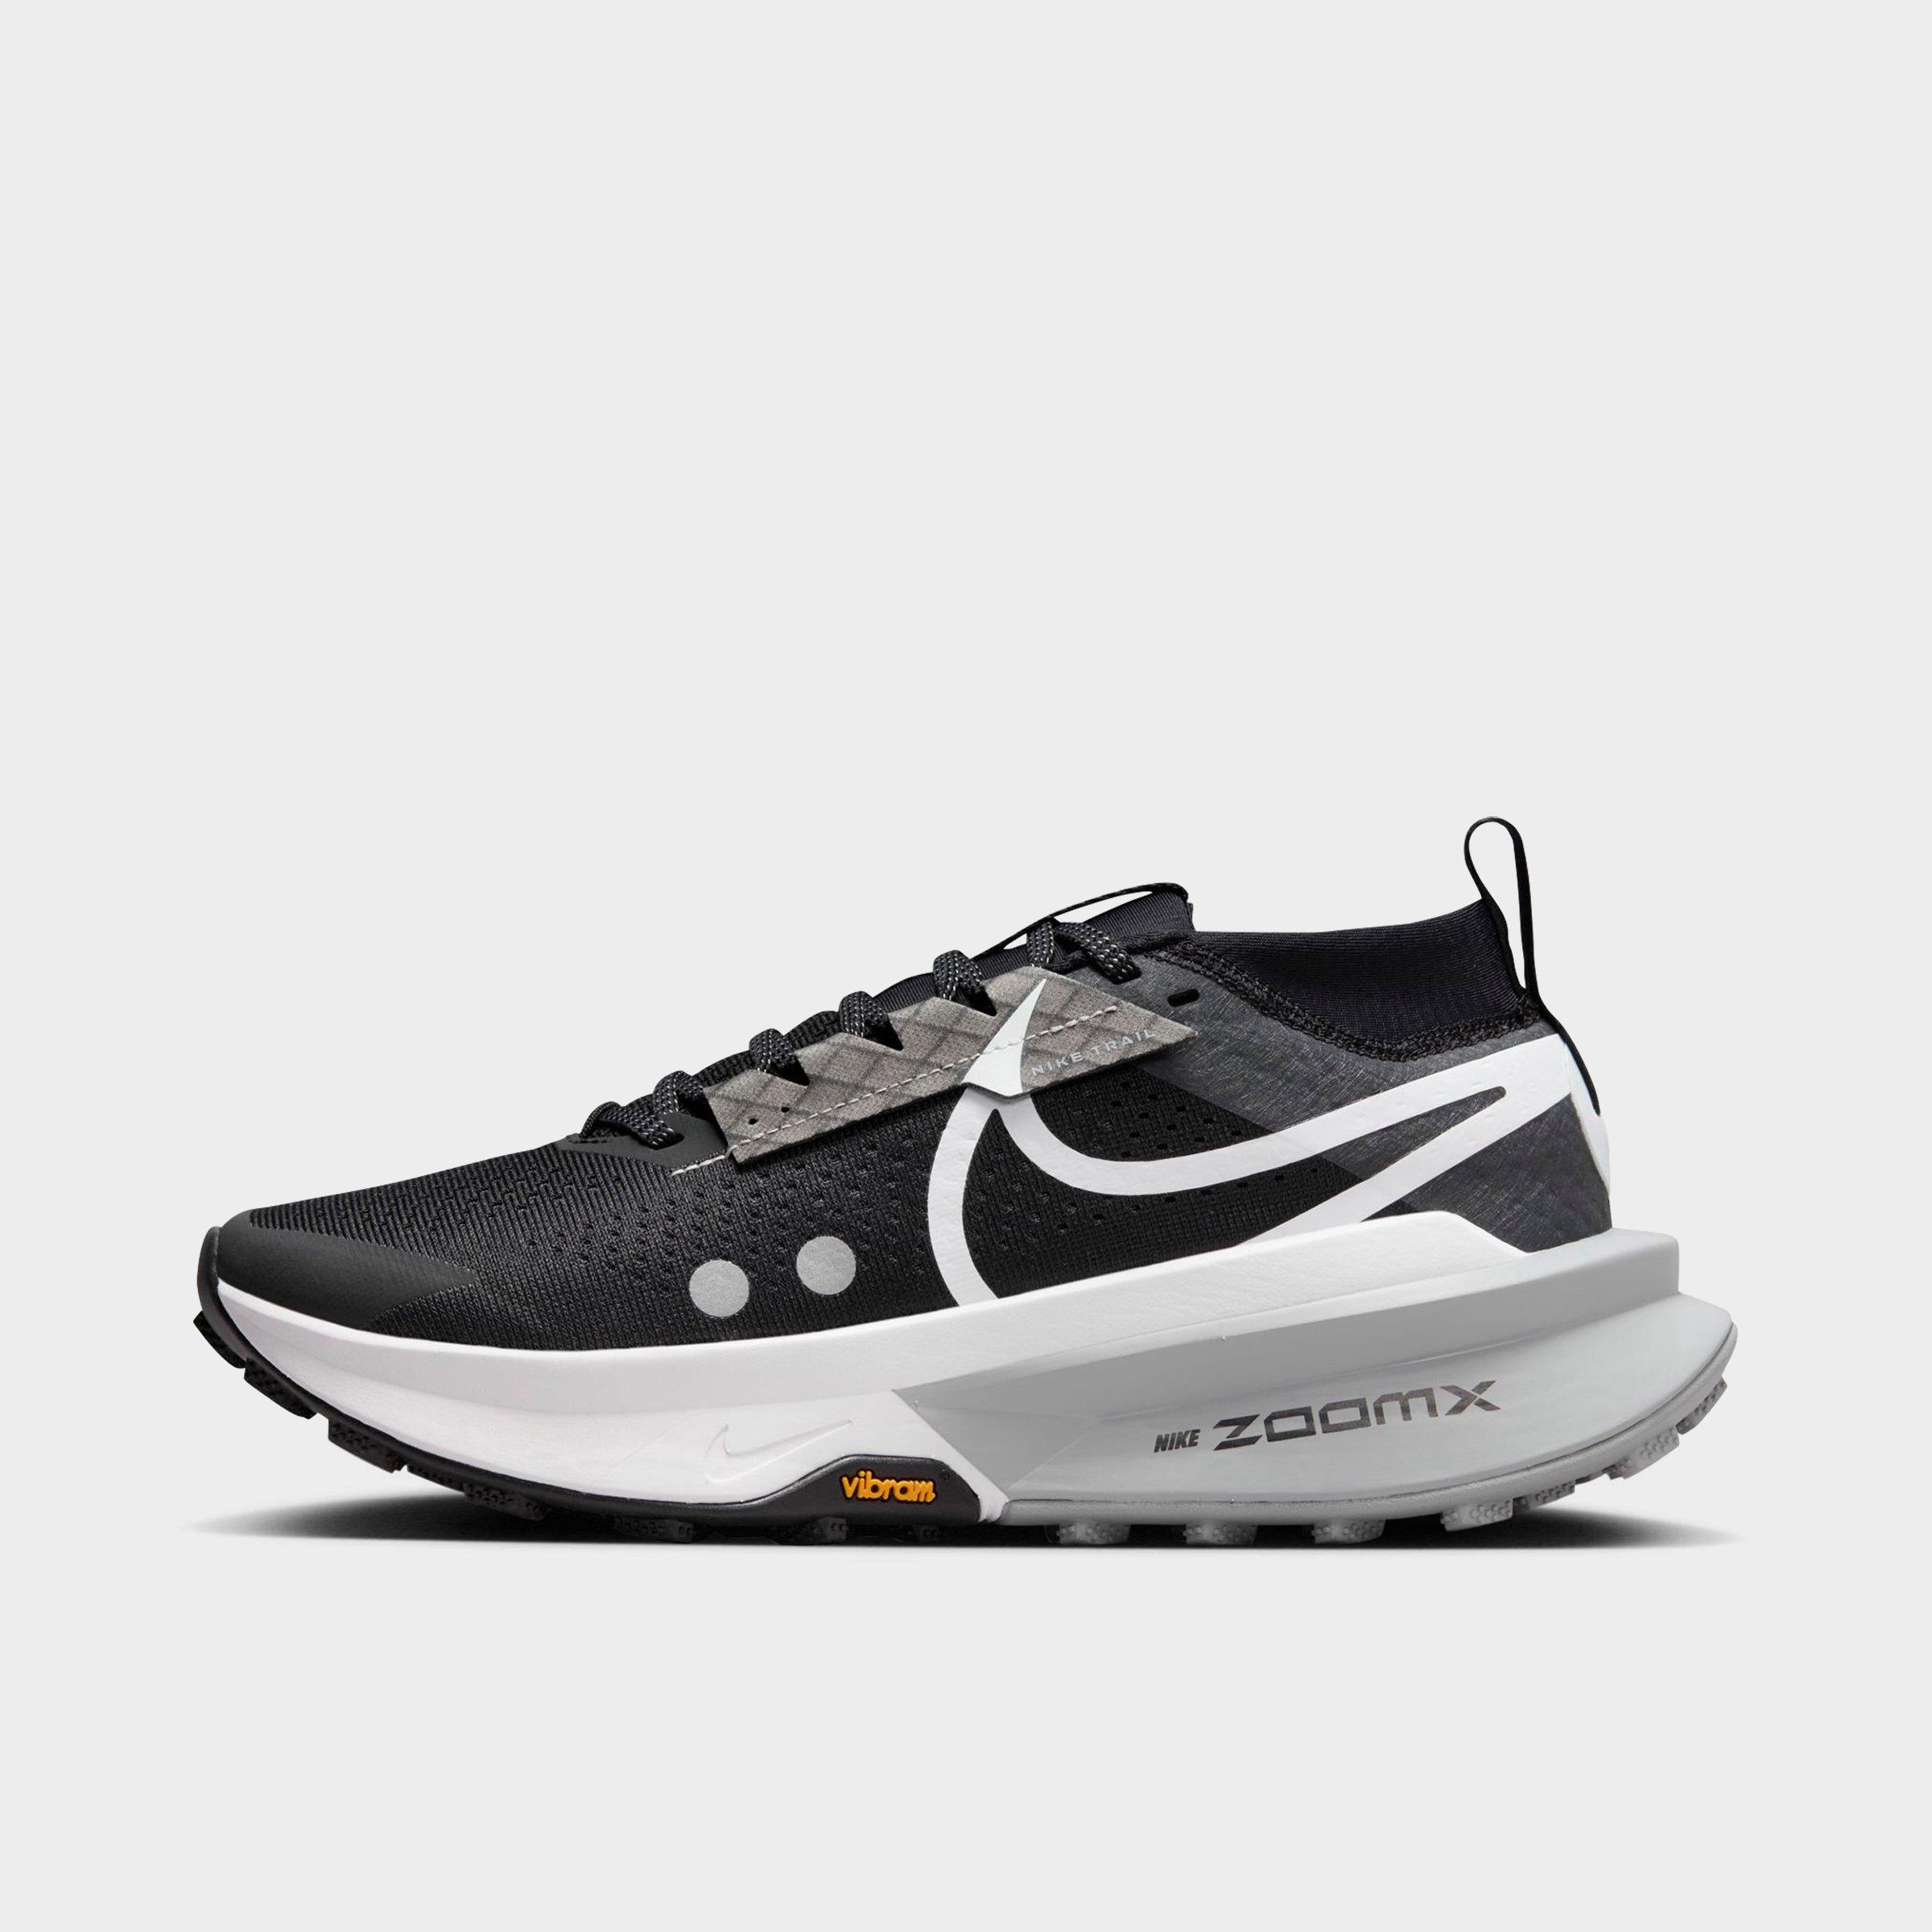 Nike Women's Zegama 2 Trail Running Shoes In Black/wolf Grey/anthracite/white